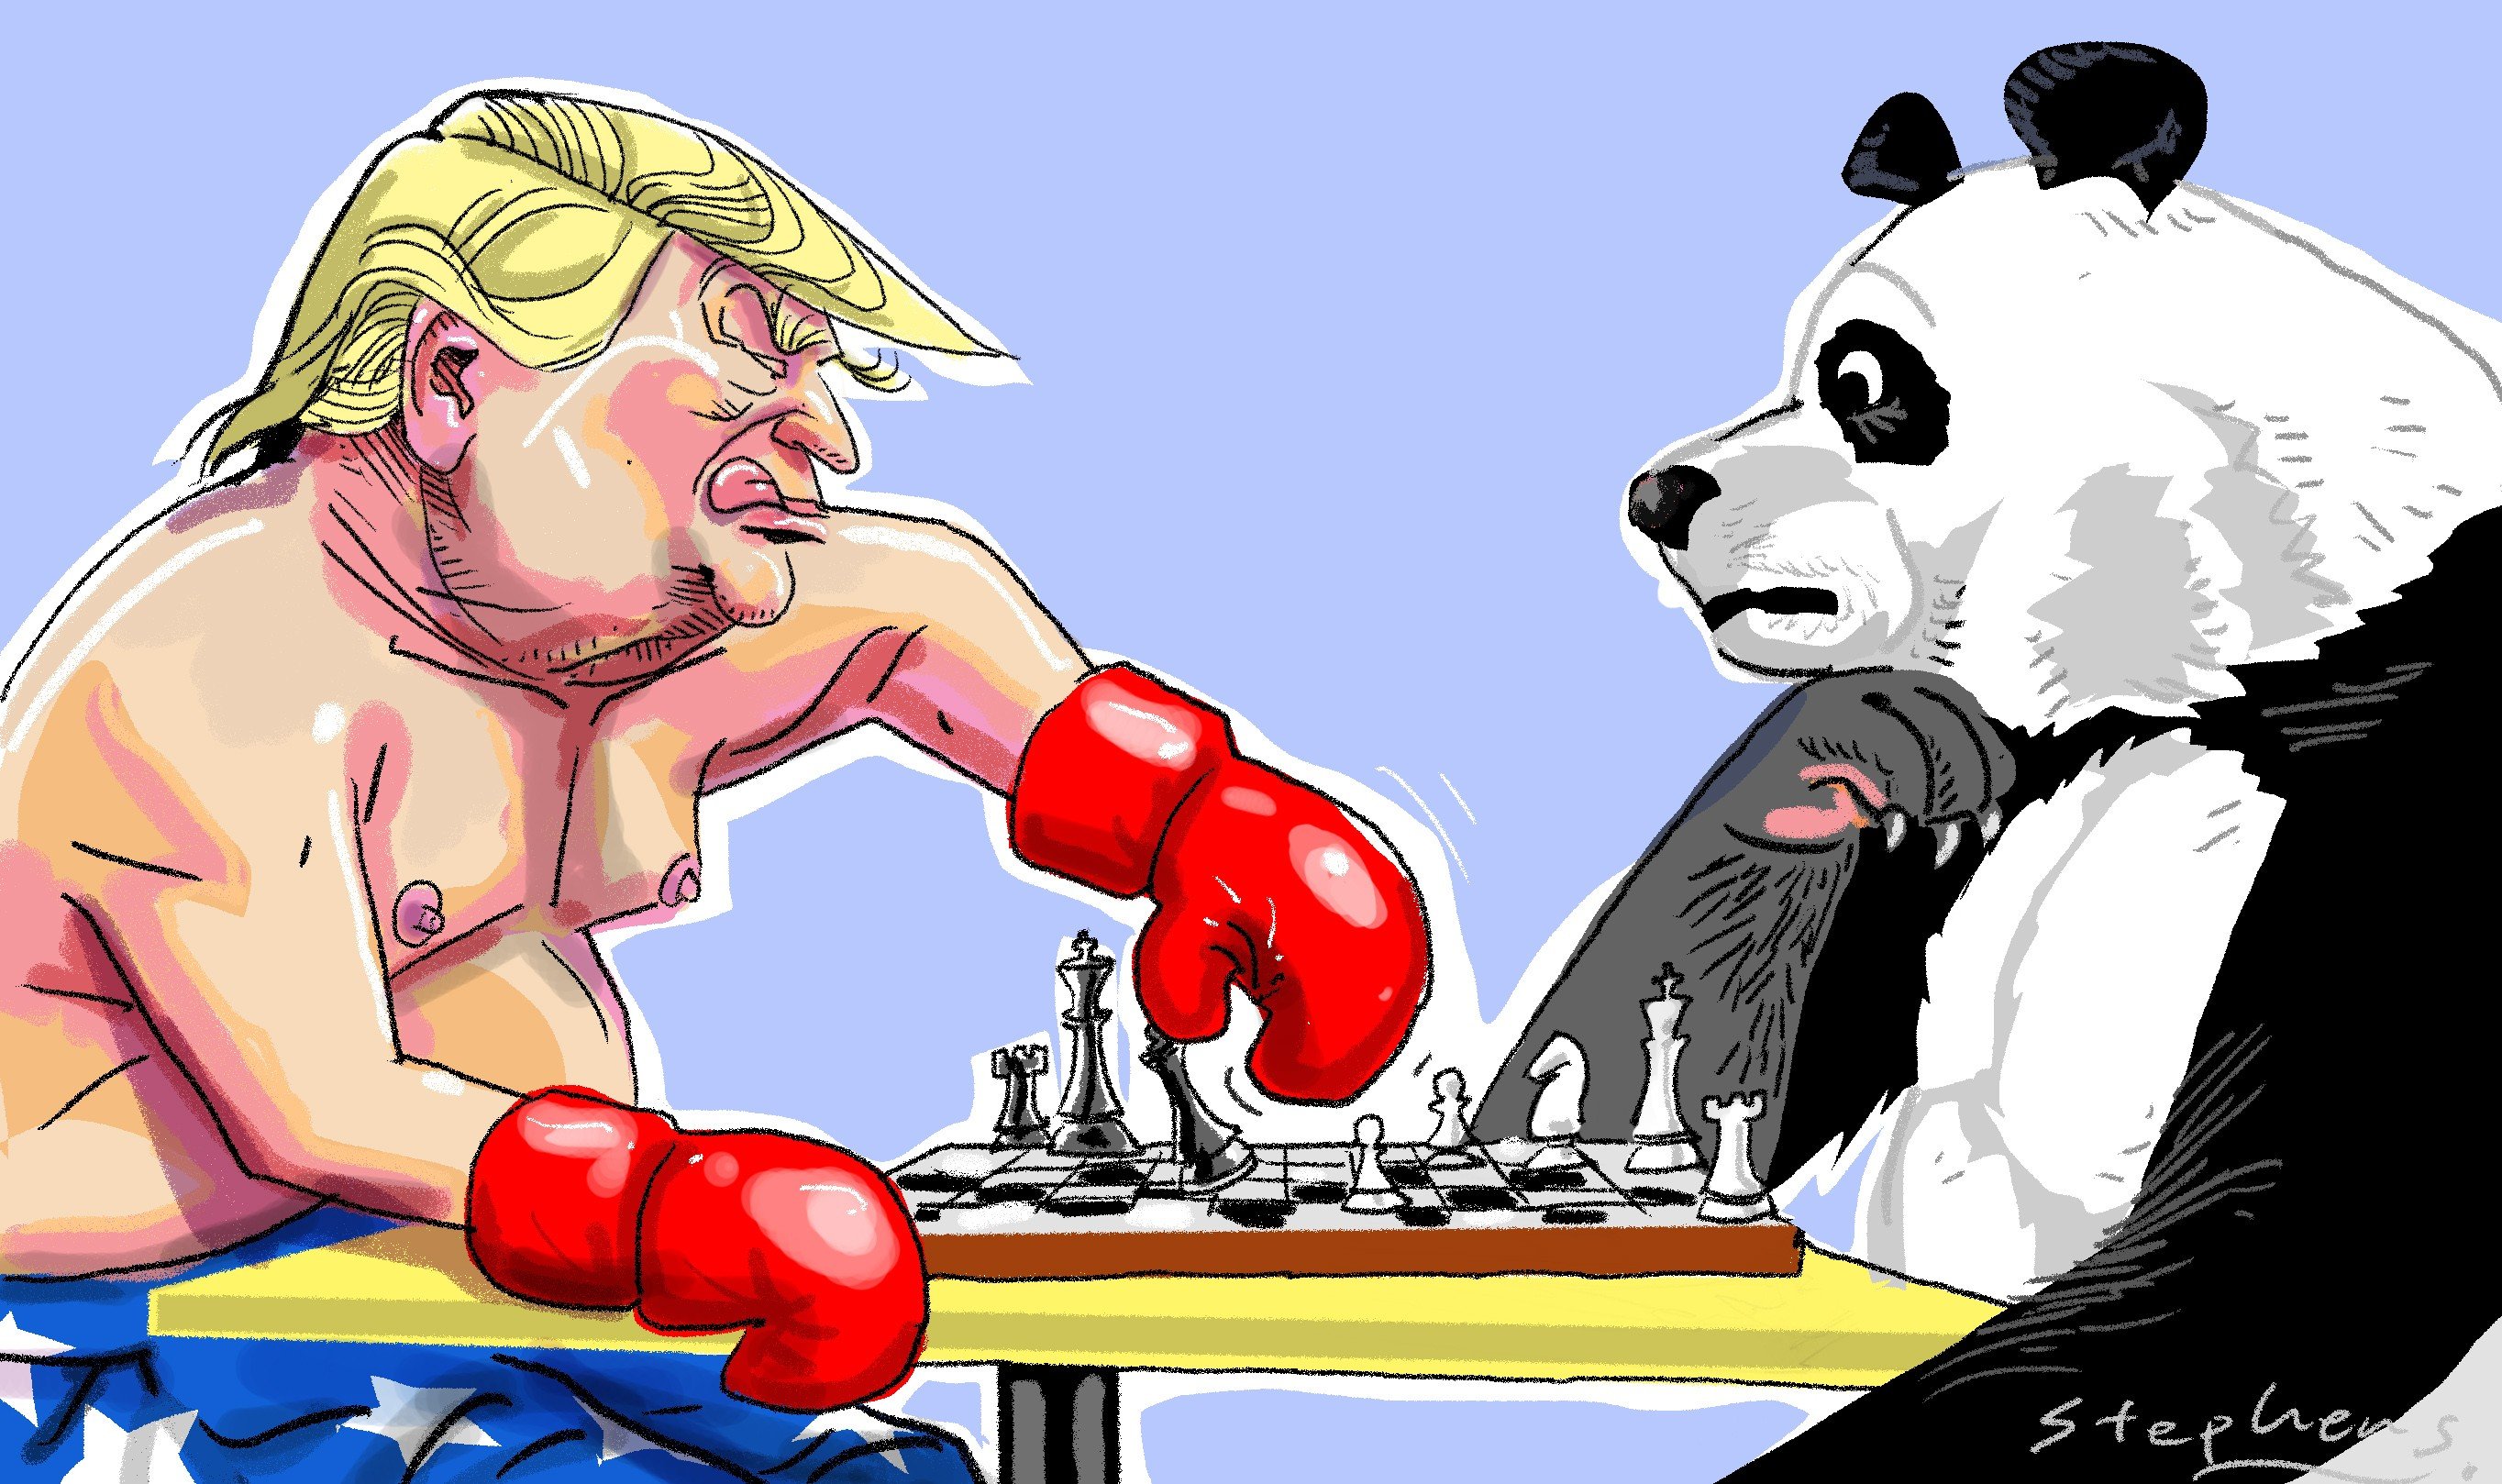 America may not be thinking strategically about its relationship with China, or its role in the wider world, according to Singapore’s prime minister, Lee Hsien Loong. Illustration: Craig Stephens